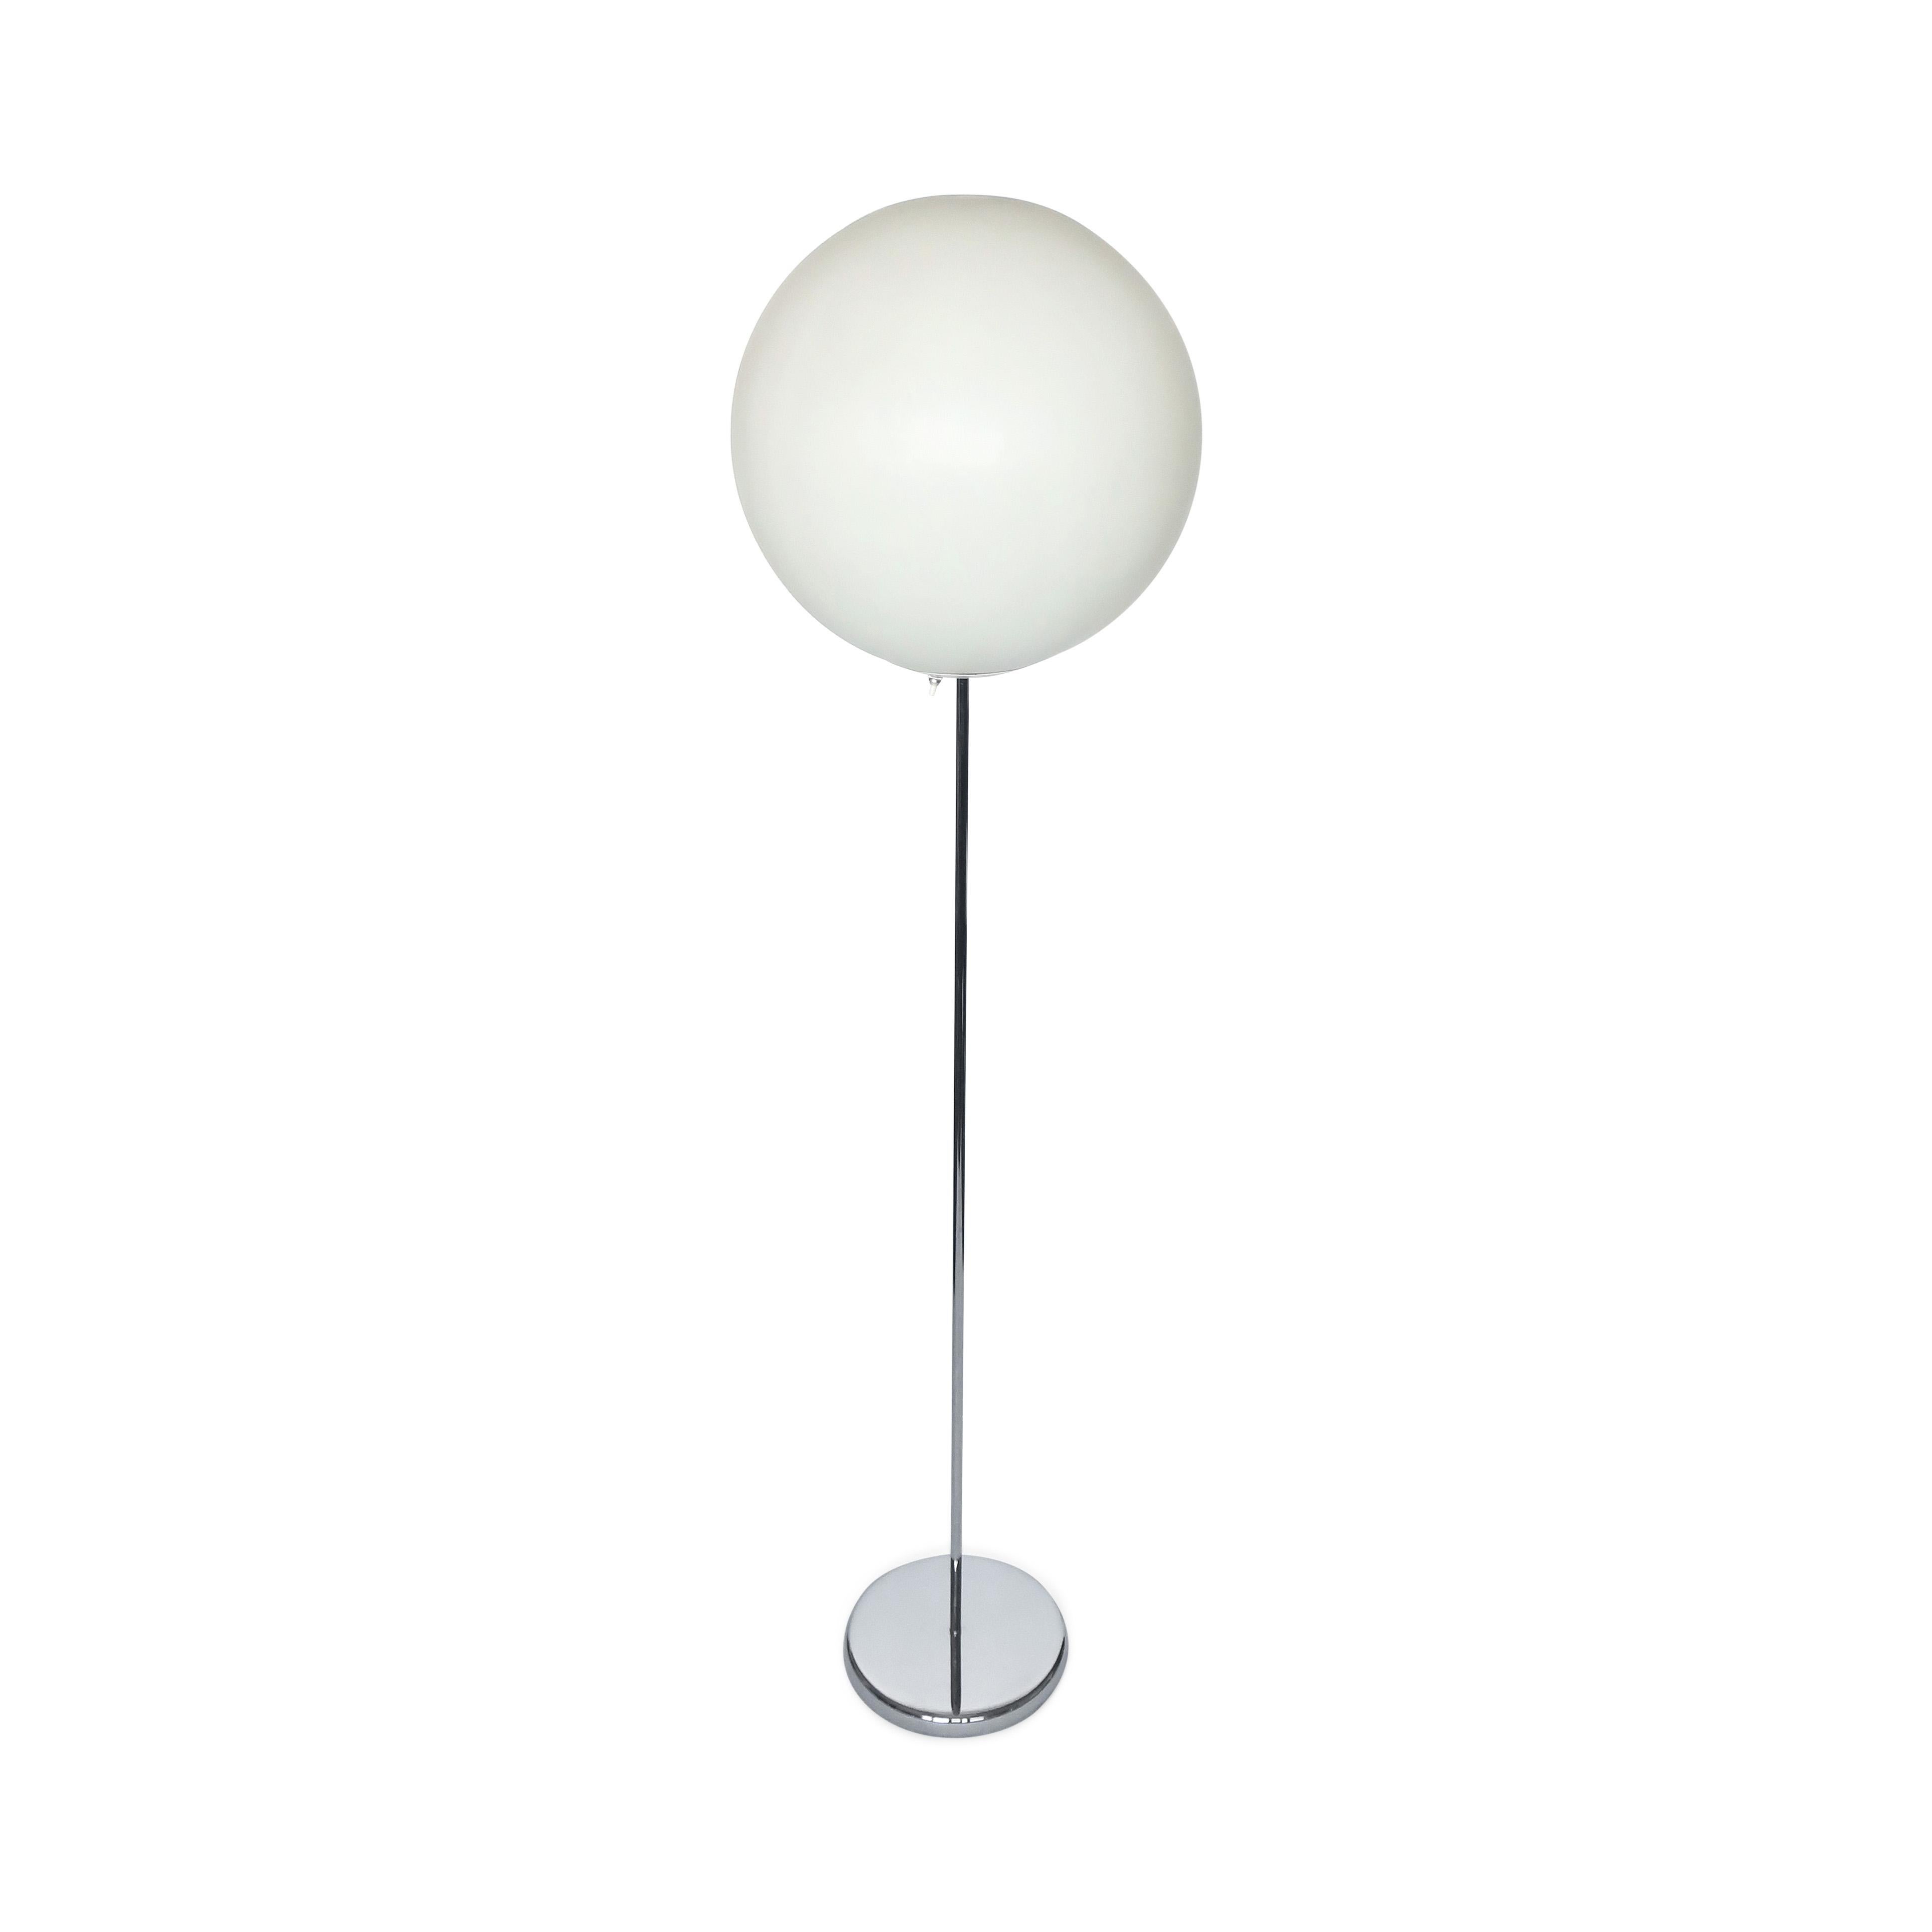 A beautiful Mid-Century Modern floor lamp with white globe shade in the style of Robert Sonneman and Neal Small. Includes a spherical light-diffusing plastic shade (much safer than a glass shade!), a round weighted chrome base, and slender chrome